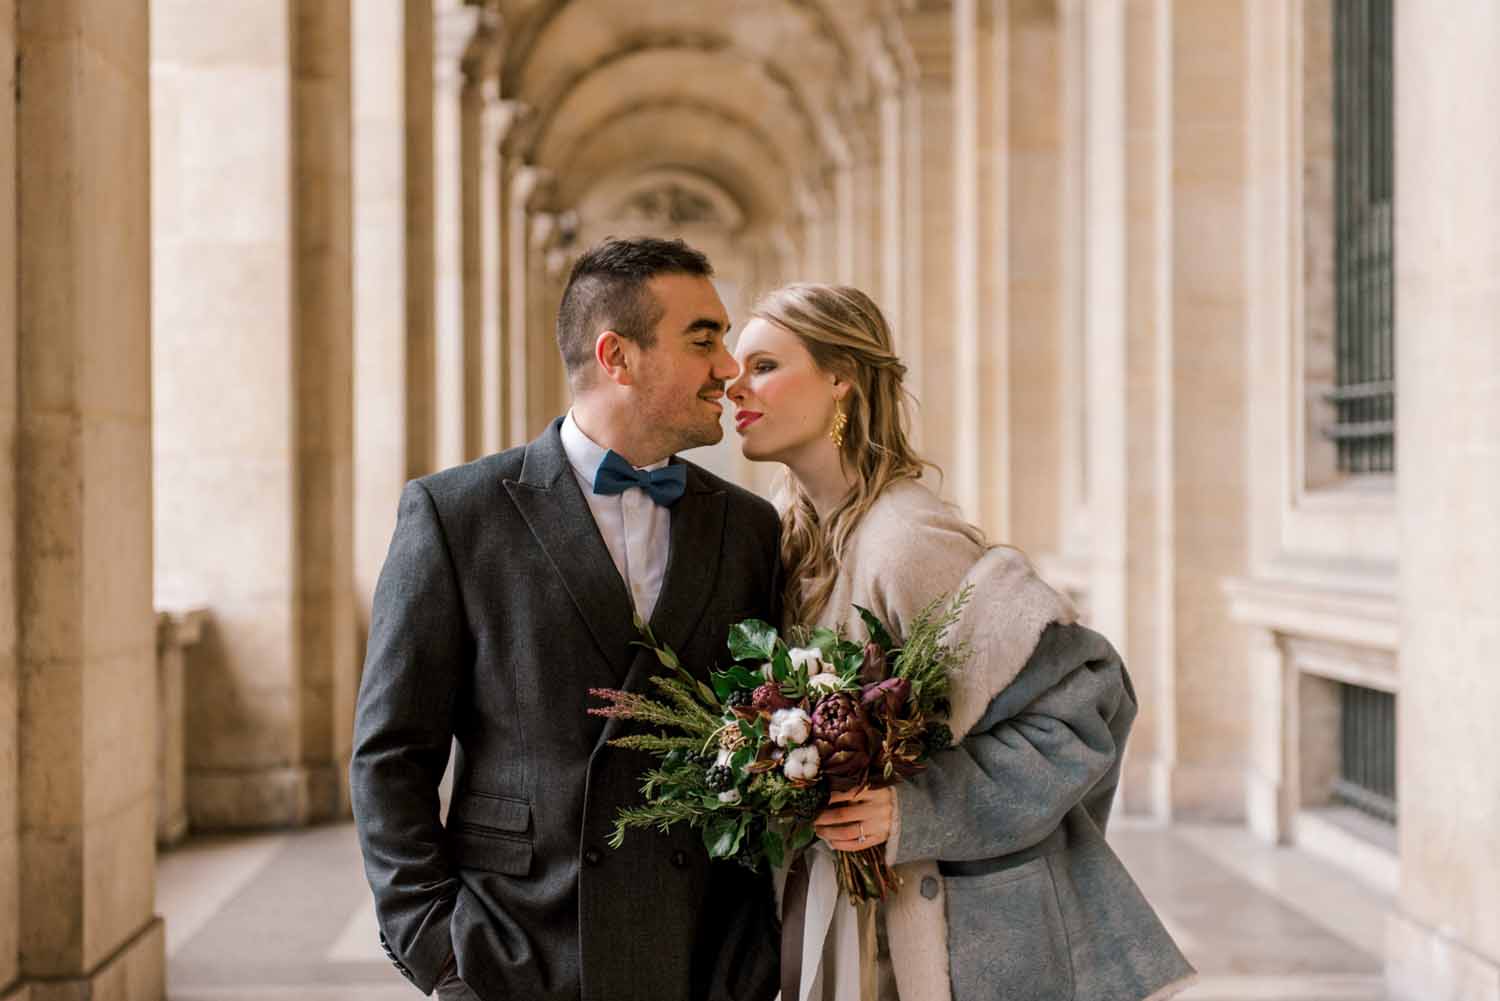 couple stands under grande building archway leaning in for a kiss following their engagement in Paris